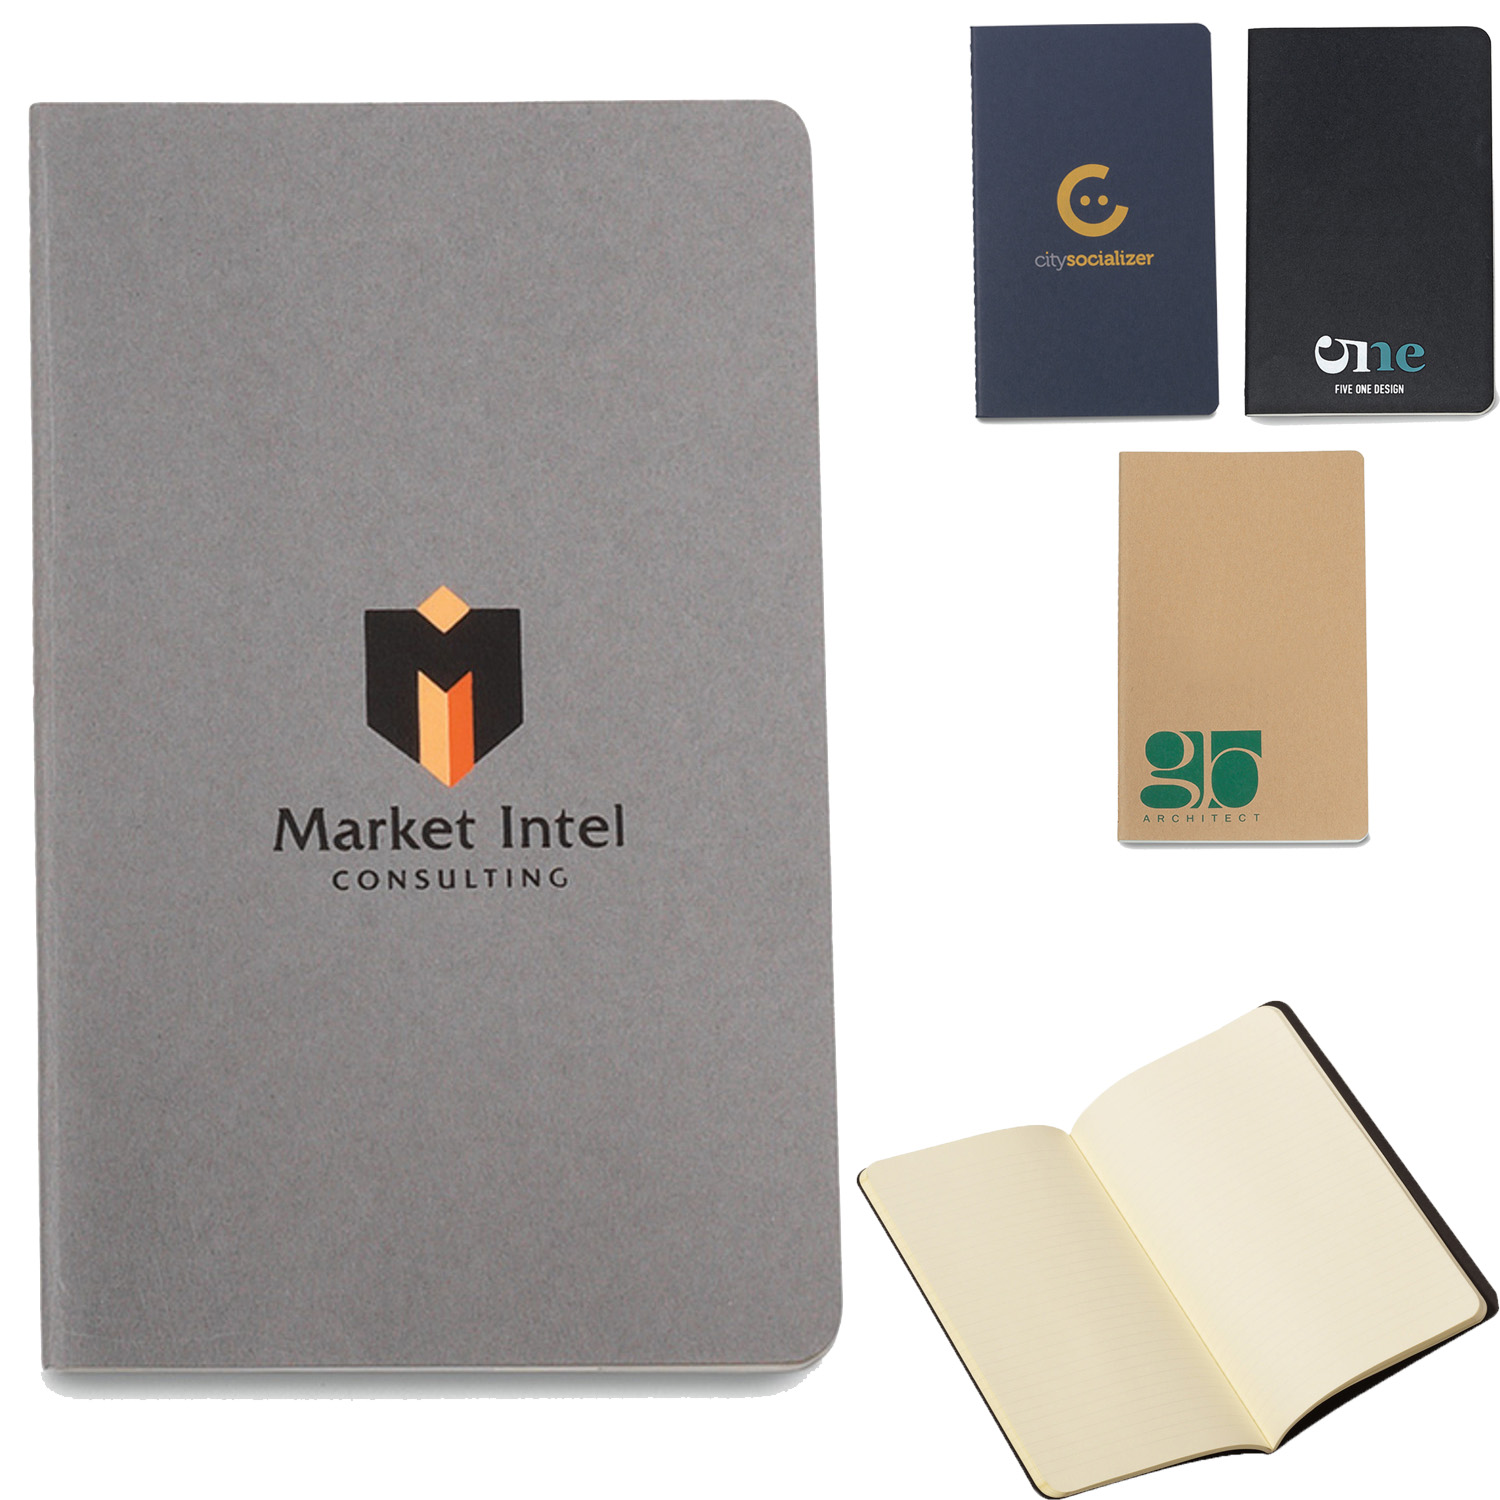 EPP Exclusive Custom New Hire Onboarding Kit with Snack Moleskine Notebook